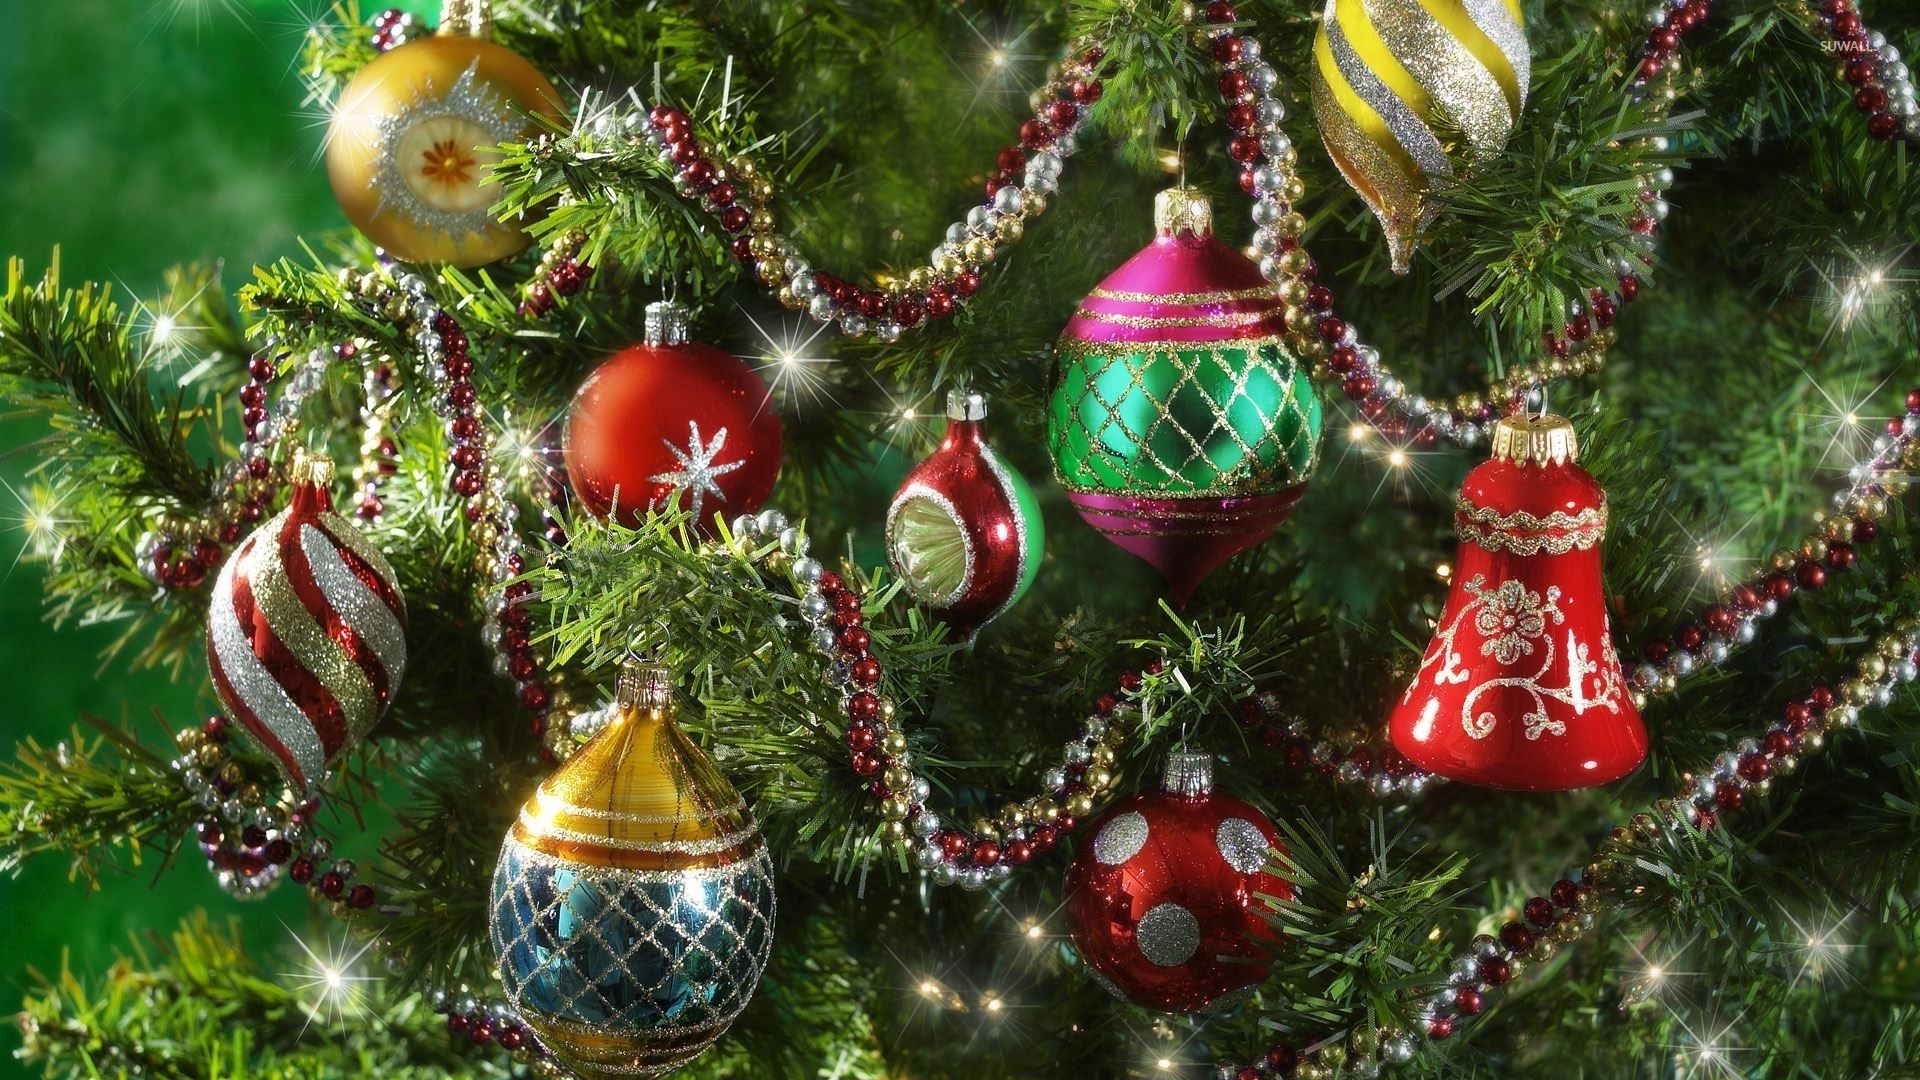 Colorful baubles in the sparkly Christmas tree wallpaper wallpaper